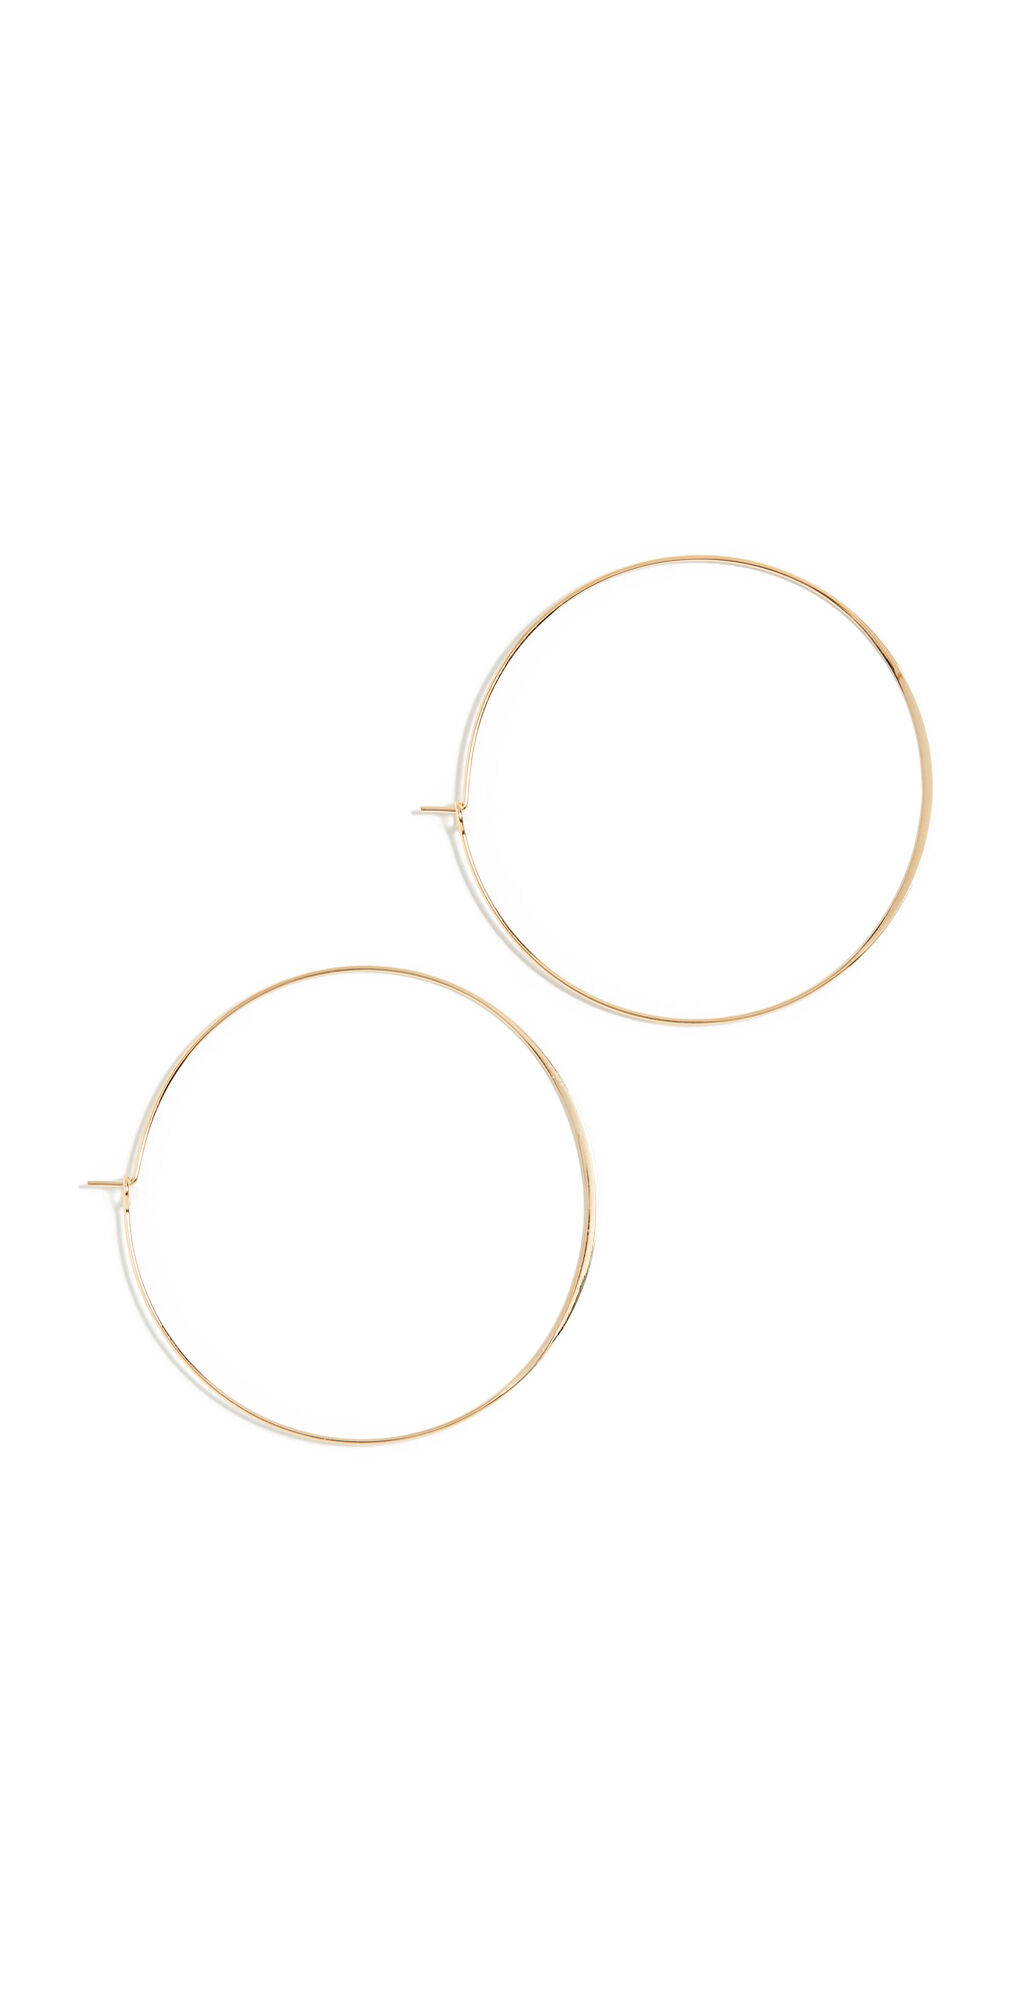 Jules Smith Suki Hoop Earrings Gold One Size  Gold  size:One Size